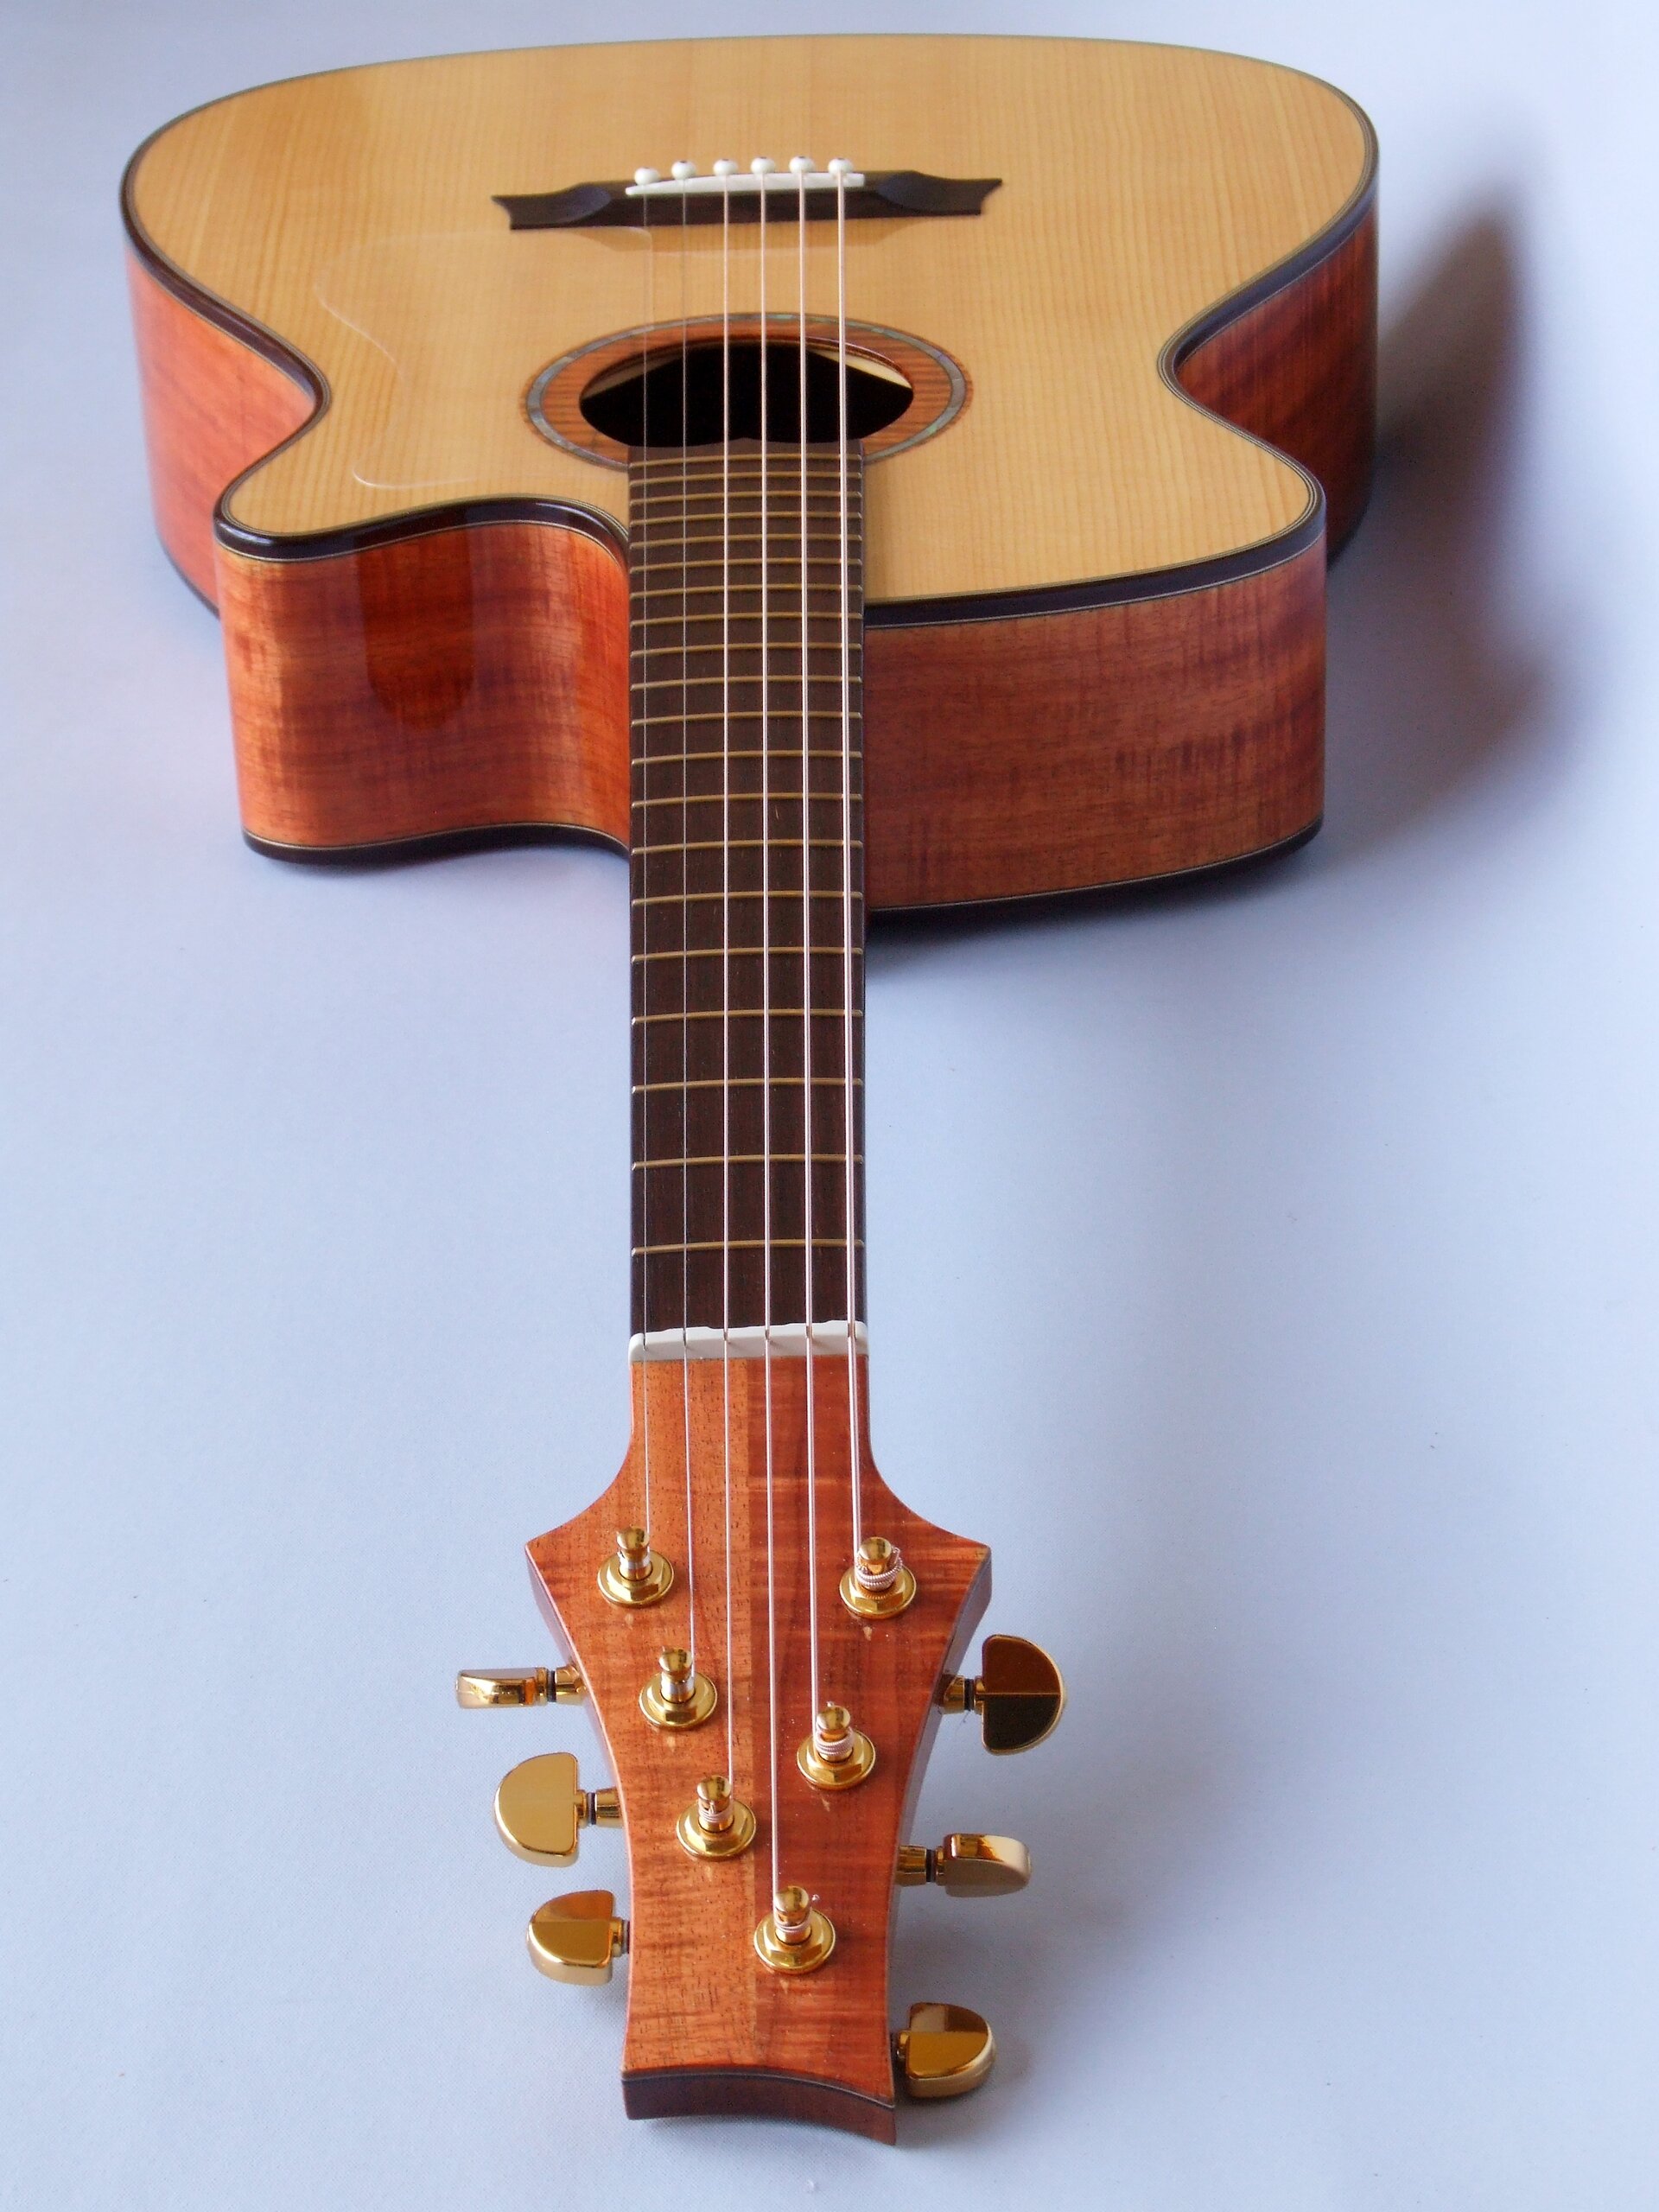 Looking down the neck of a blackwood guitar with rosewood binding